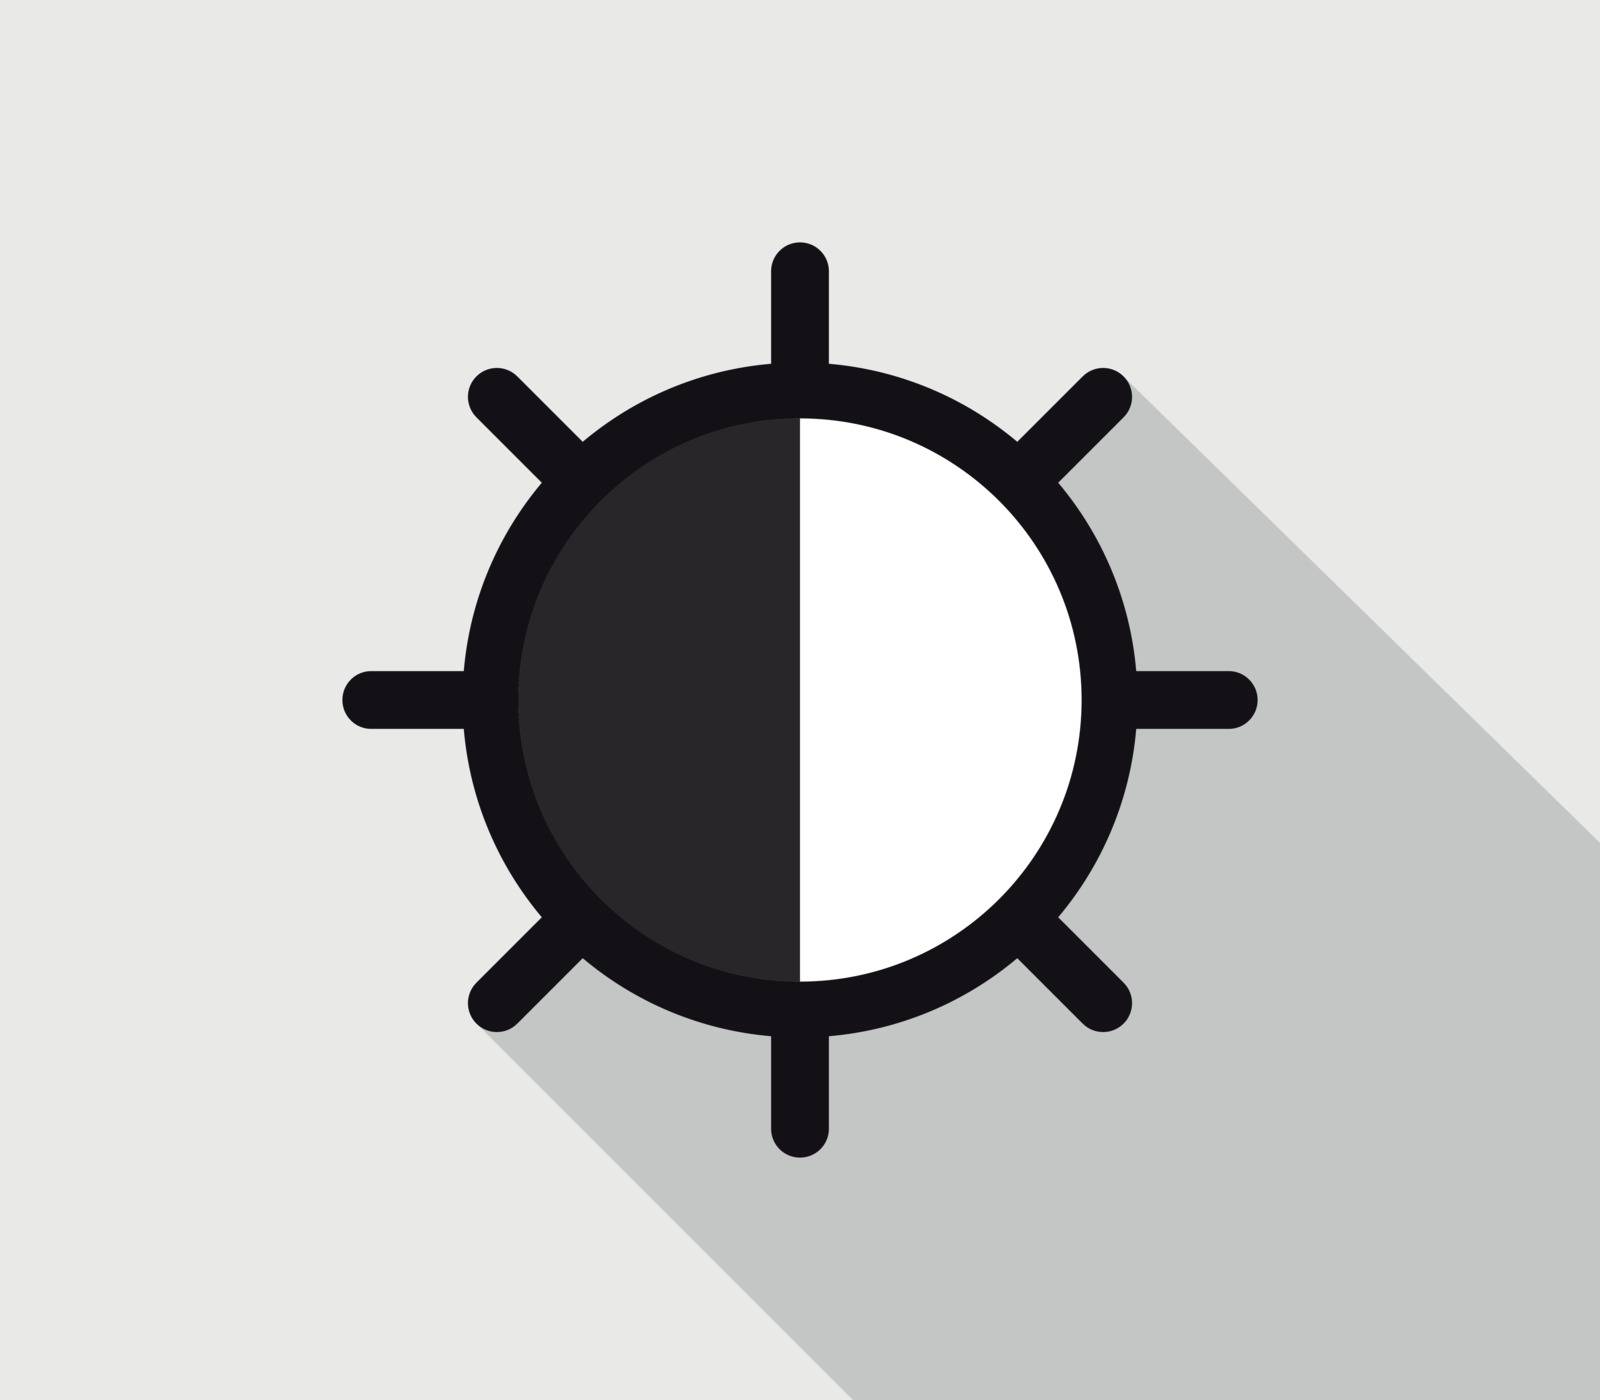 contrast icon by Mark1987